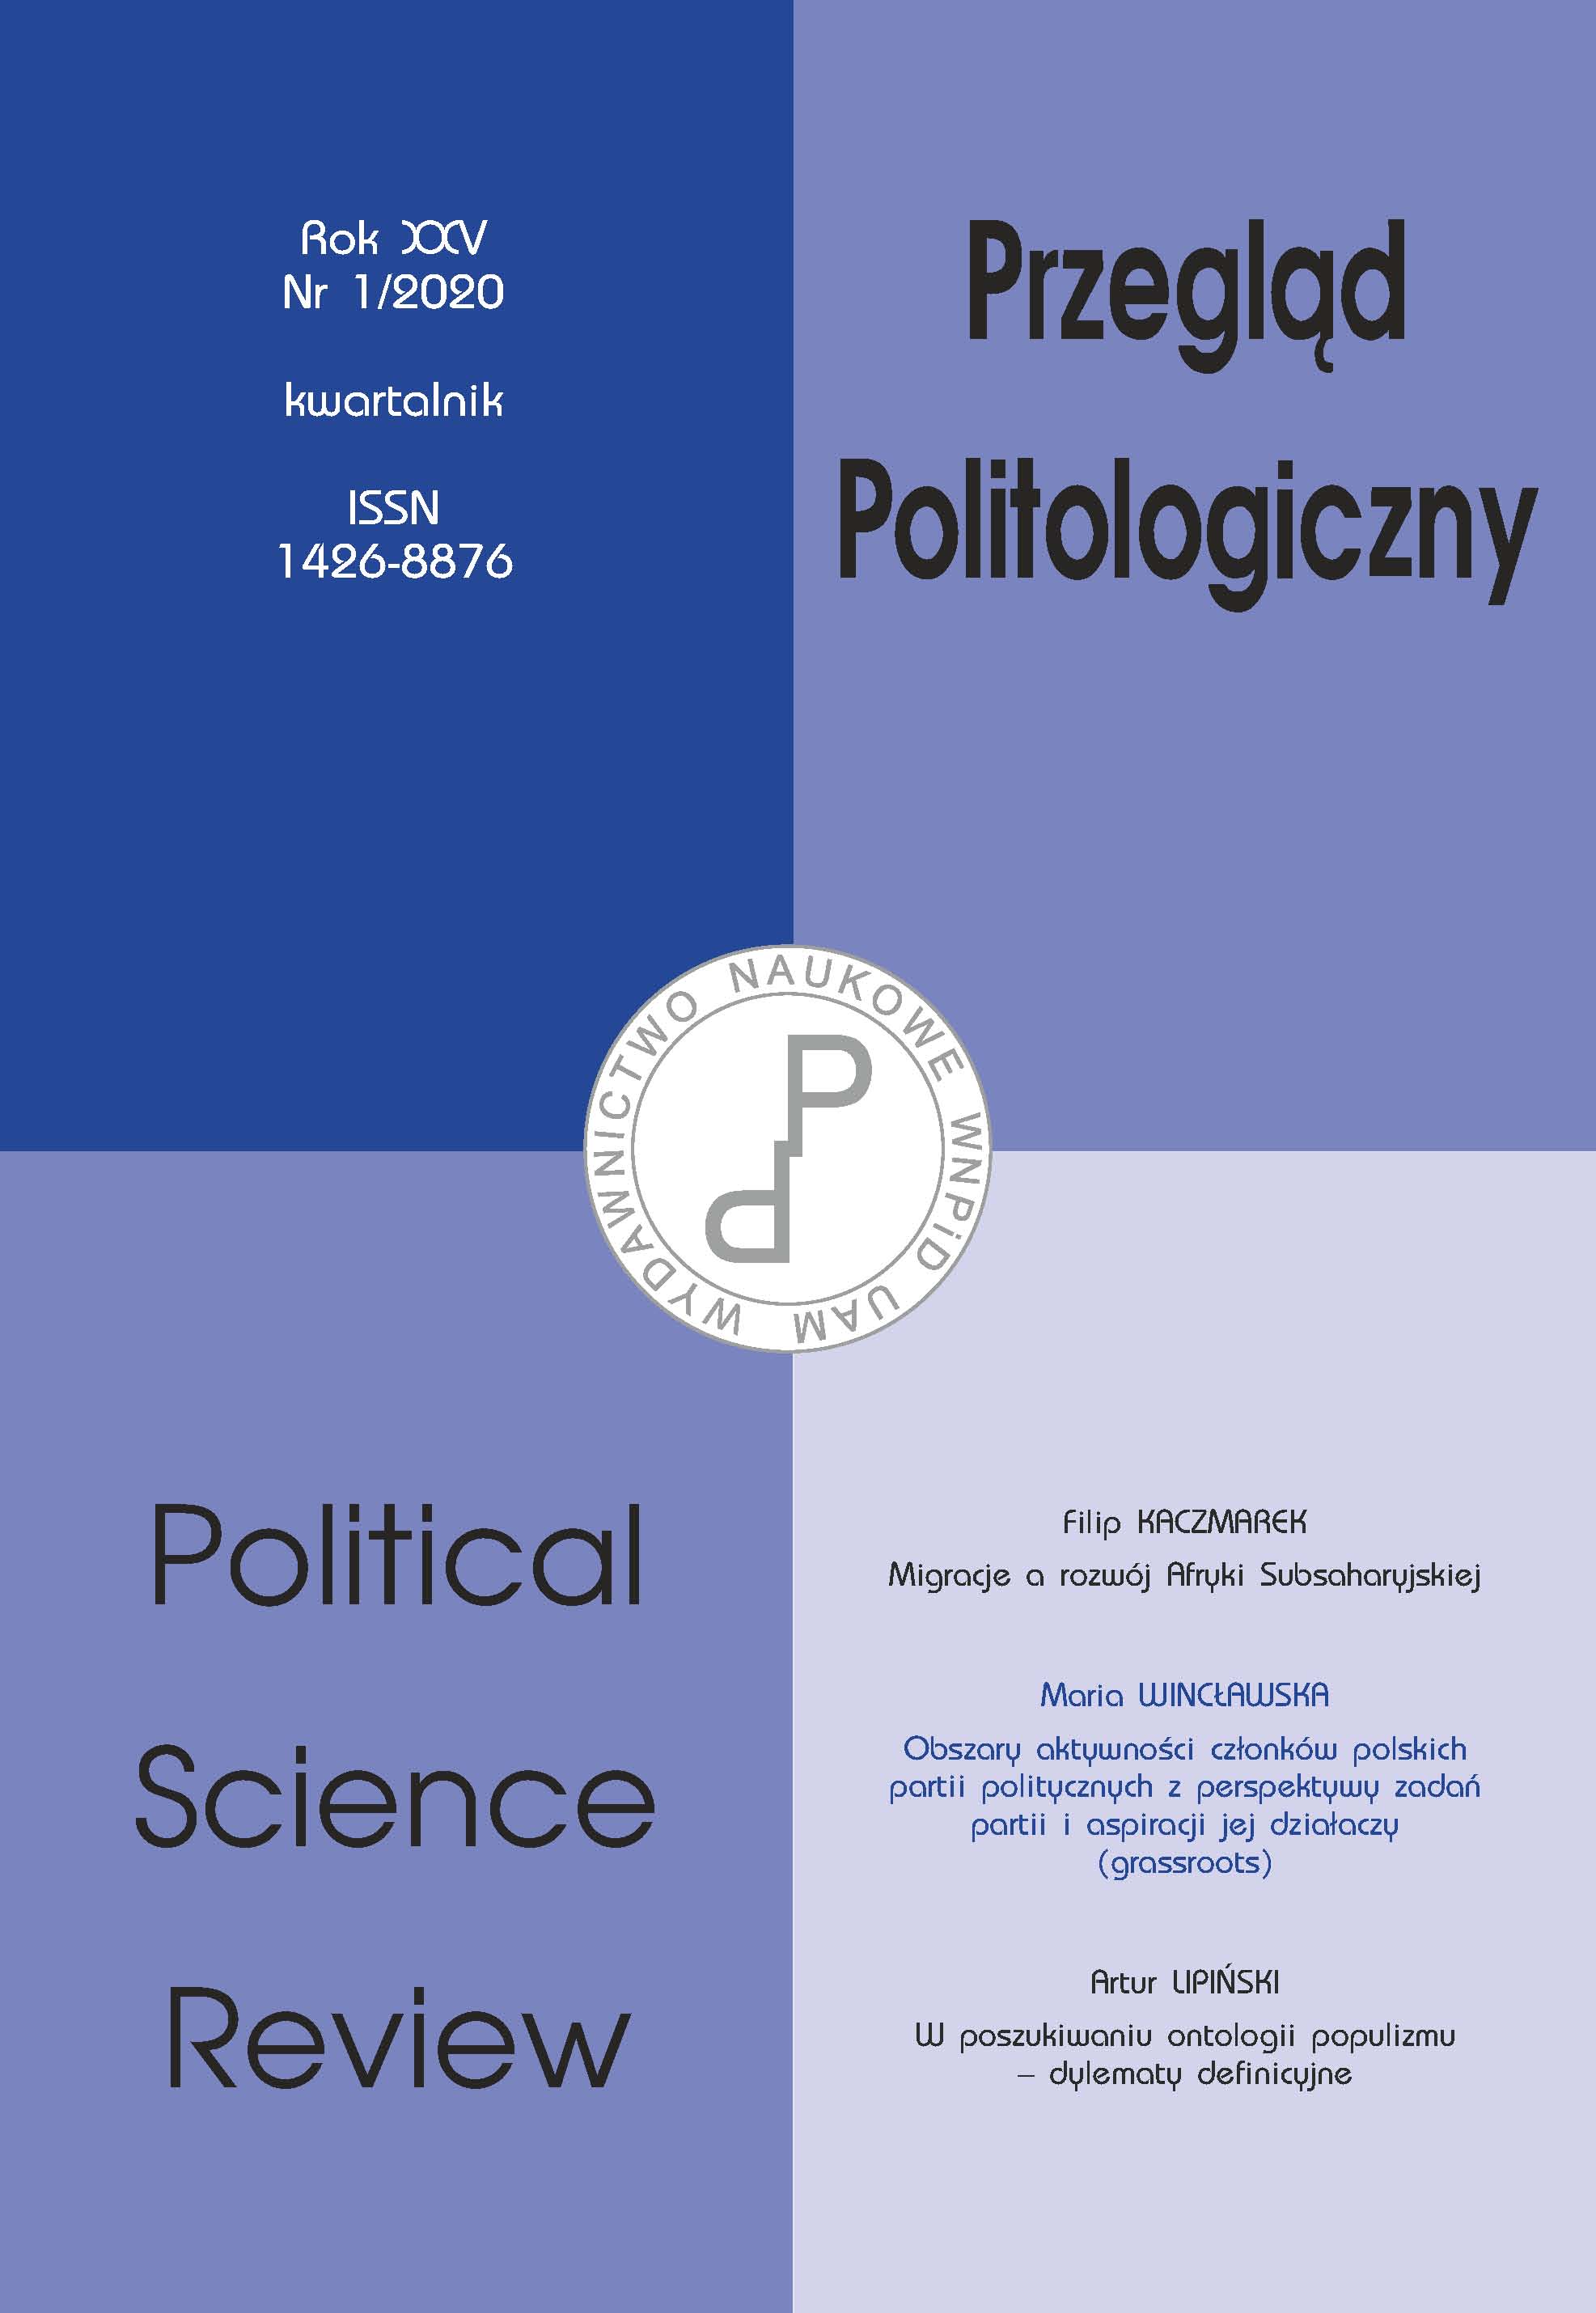 Activities of the members of Polish political parties from the perspective of the functions and aspirations of the grassroots Cover Image